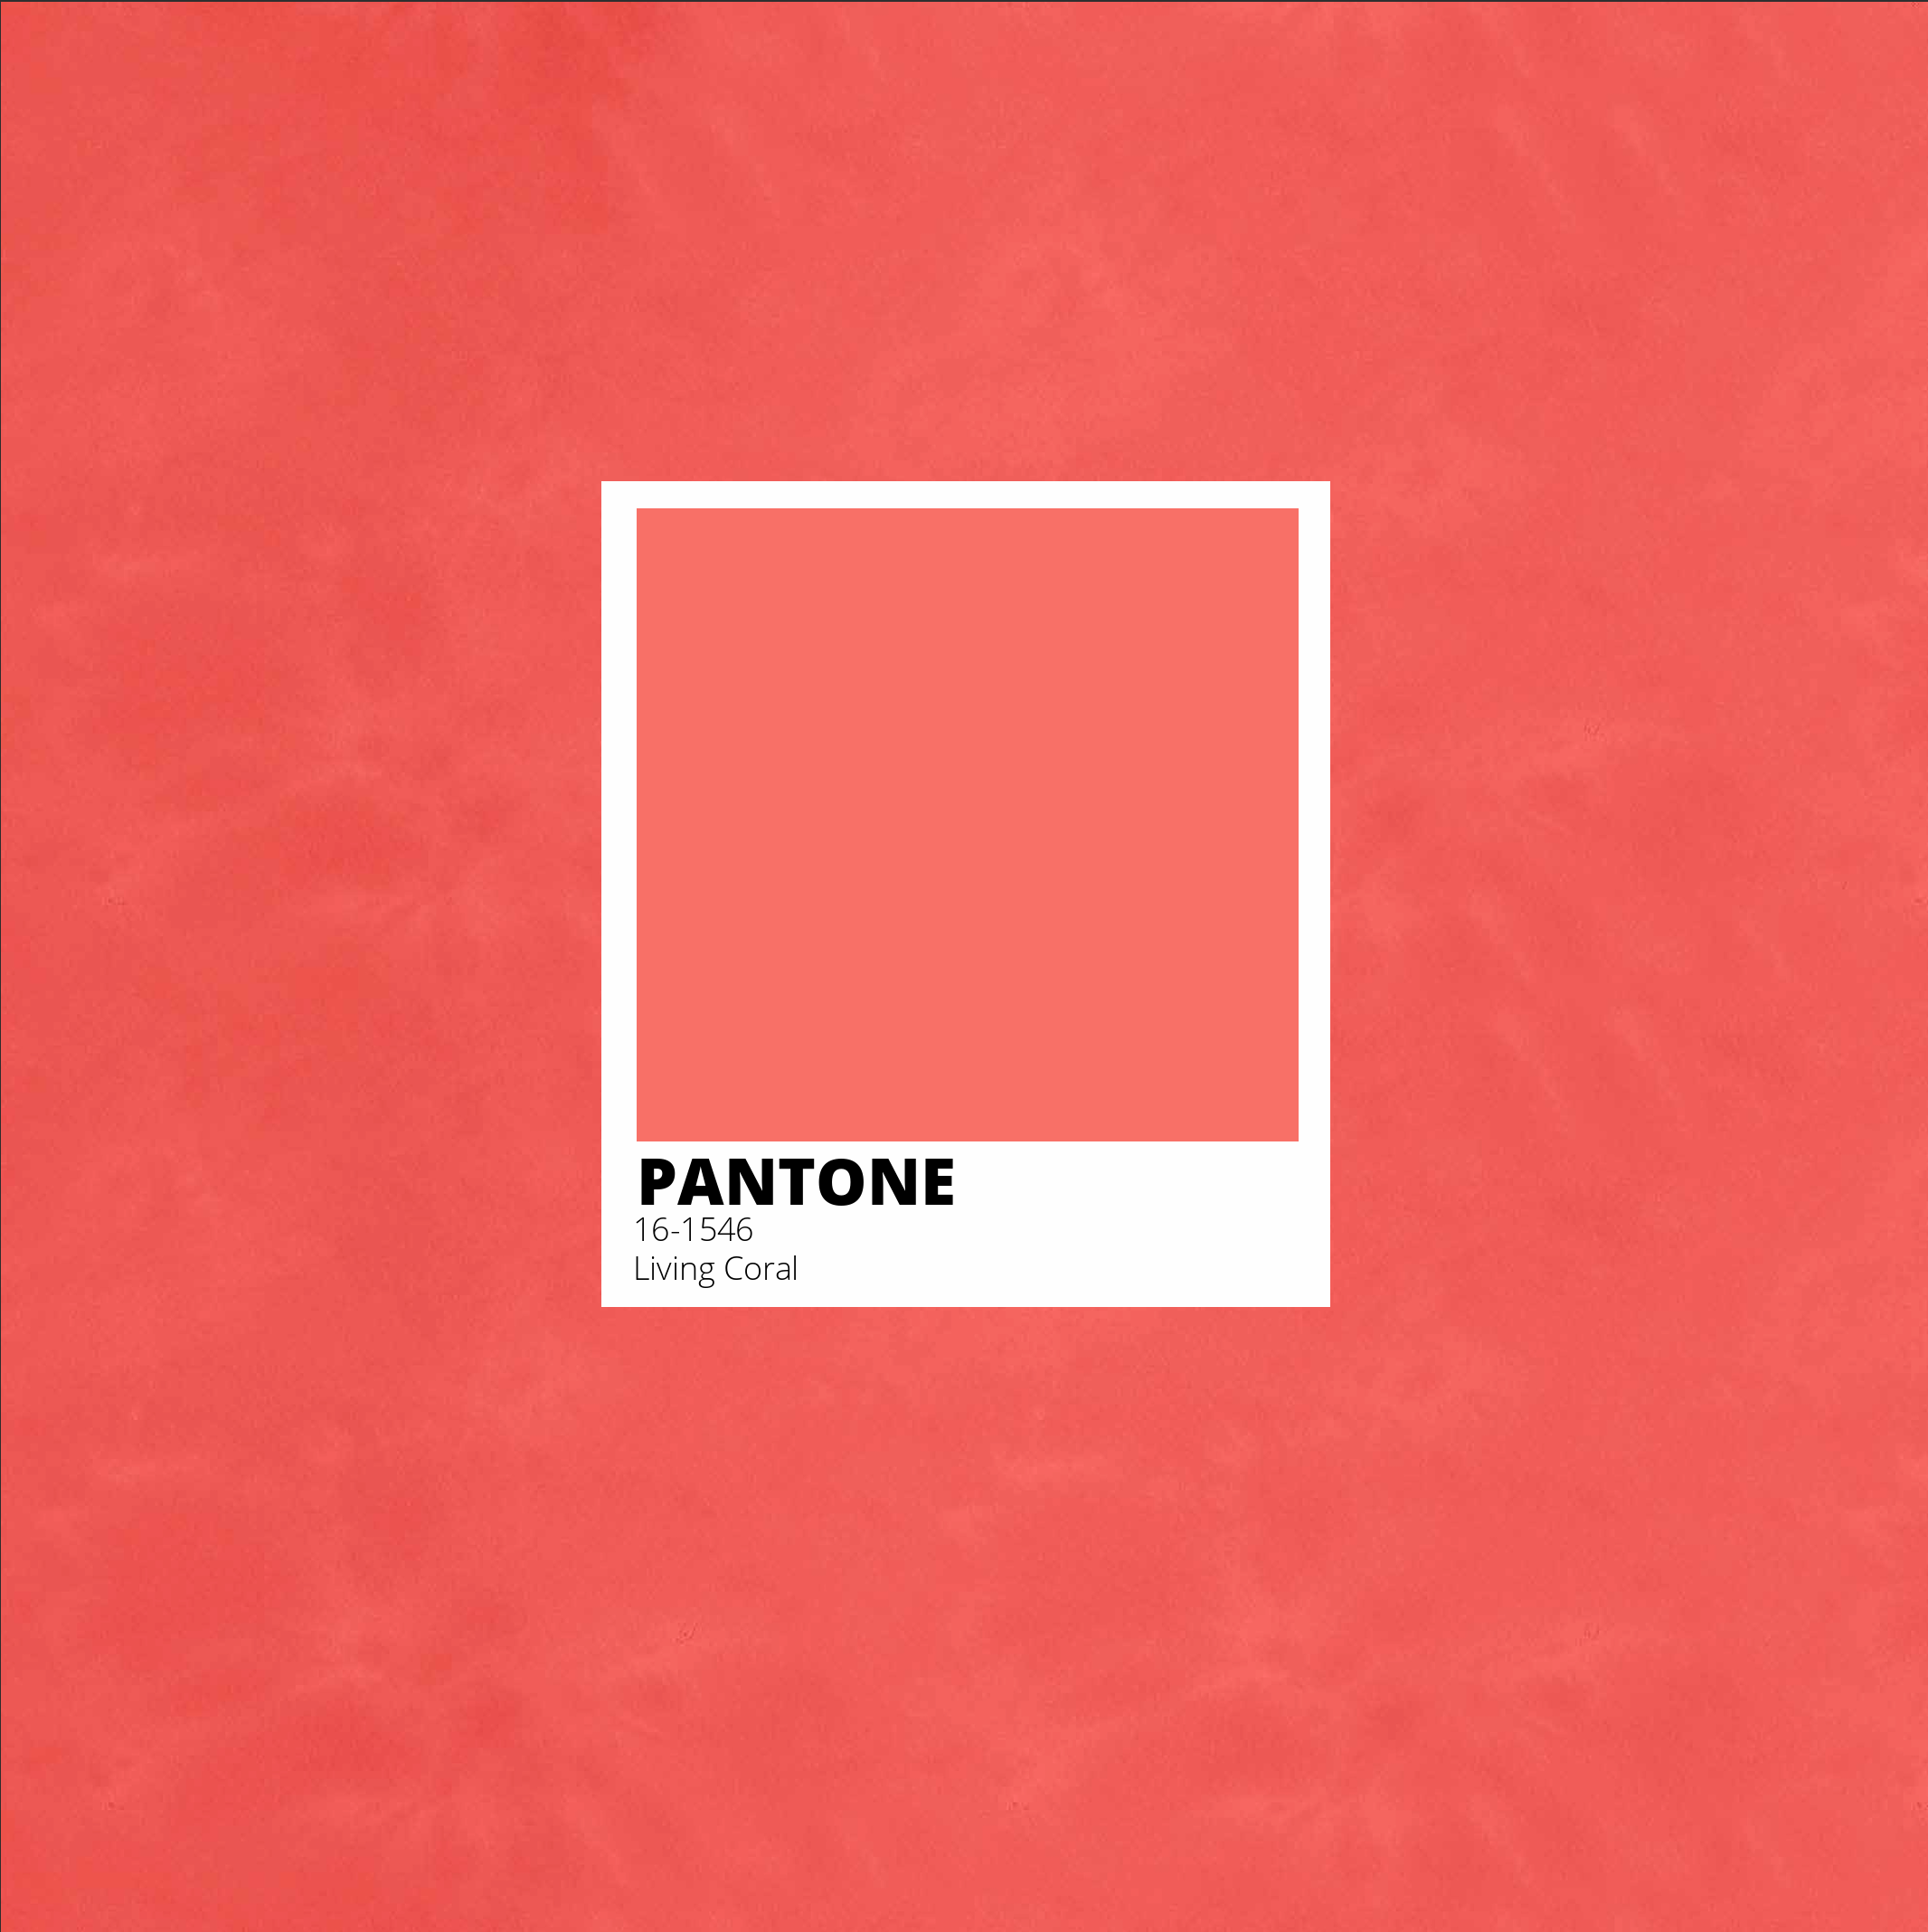 An image of Pantone's 2016 Color of the Year - Living Coral, a shade of red